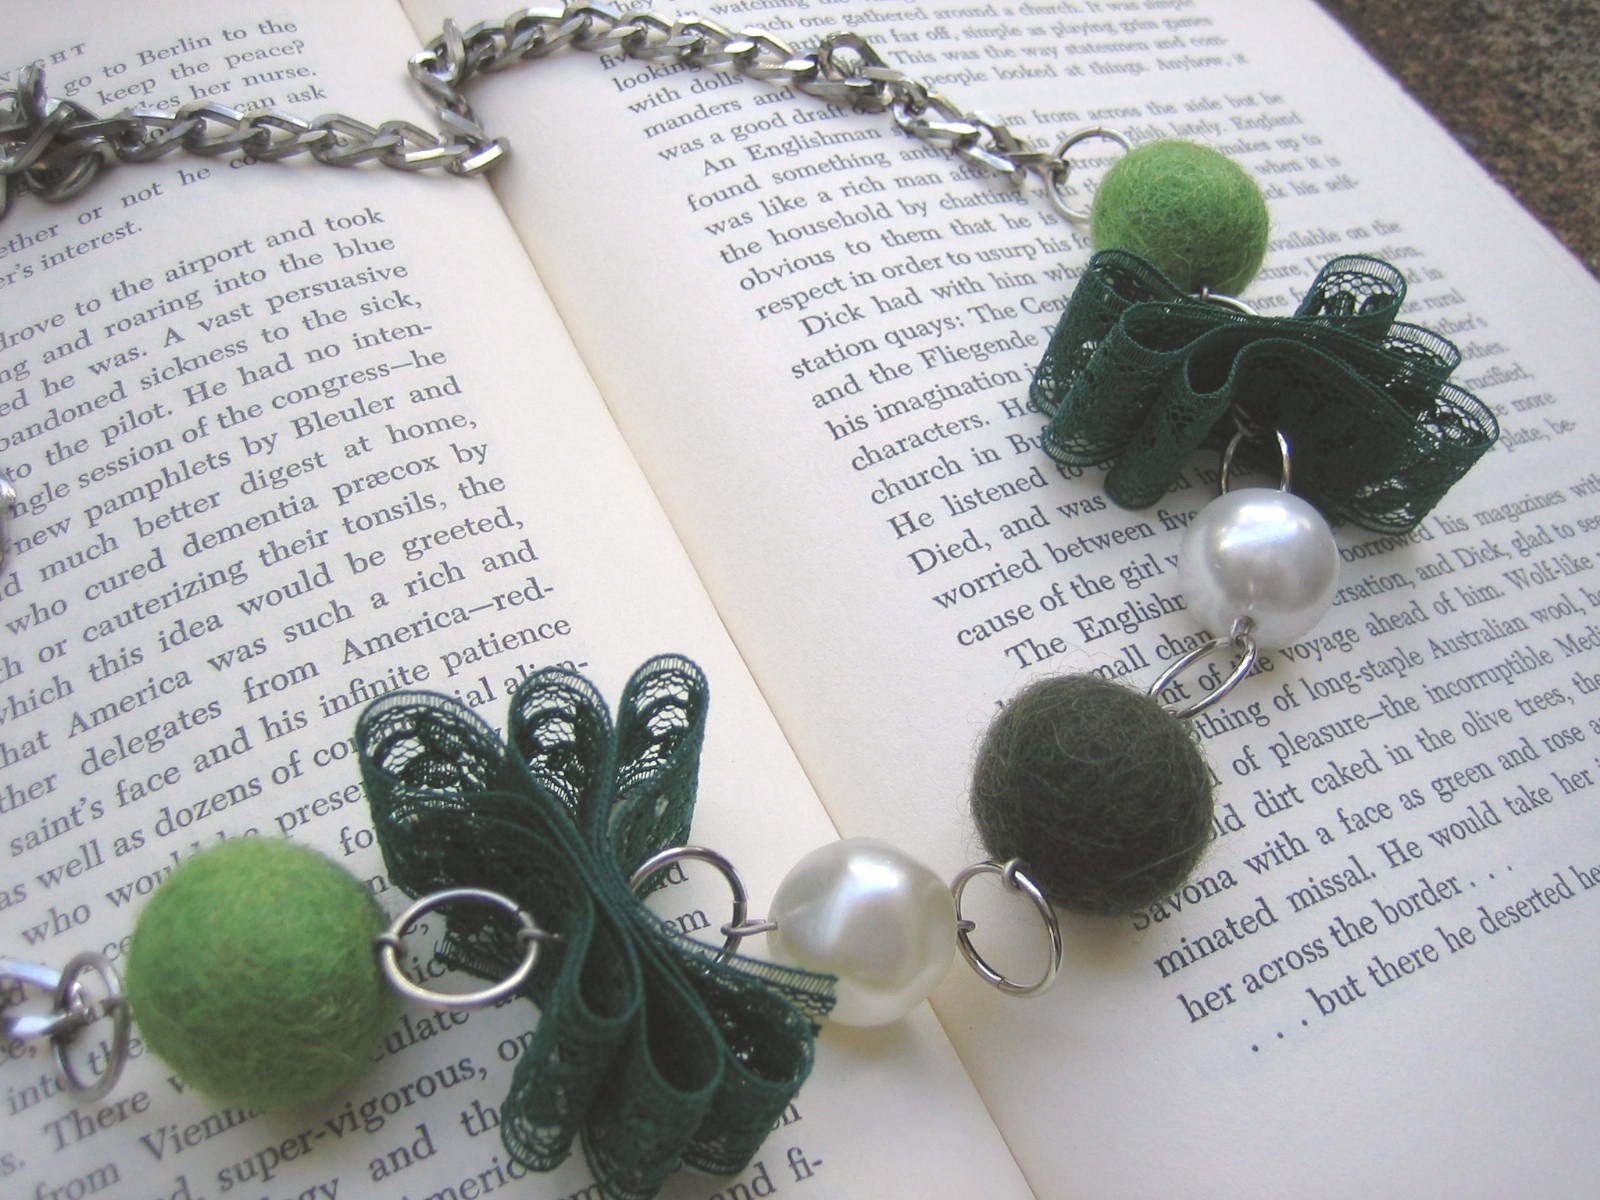 Unique Bead and Lace Necklace (Moss Green) - Recycled Vintage Chain, Beads and Lace, Handmade Felted Wool Beads in Shades of Green